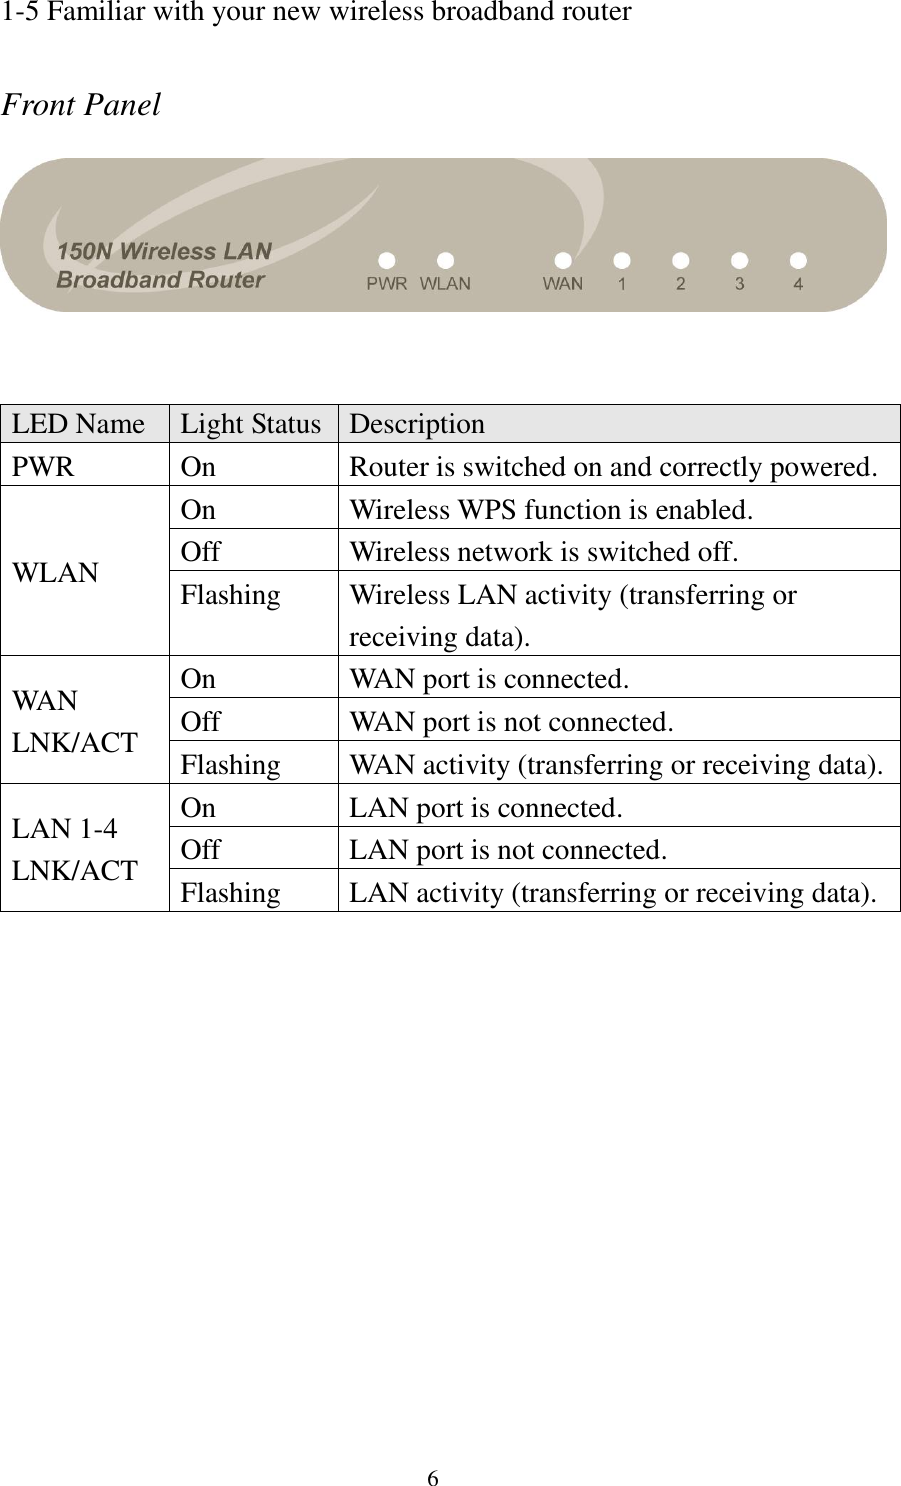 6 1-5 Familiar with your new wireless broadband router  Front Panel    LED Name Light Status Description PWR On Router is switched on and correctly powered. WLAN On Wireless WPS function is enabled. Off Wireless network is switched off. Flashing Wireless LAN activity (transferring or receiving data). WAN LNK/ACT On WAN port is connected. Off WAN port is not connected. Flashing WAN activity (transferring or receiving data). LAN 1-4 LNK/ACT On LAN port is connected. Off LAN port is not connected. Flashing LAN activity (transferring or receiving data).  